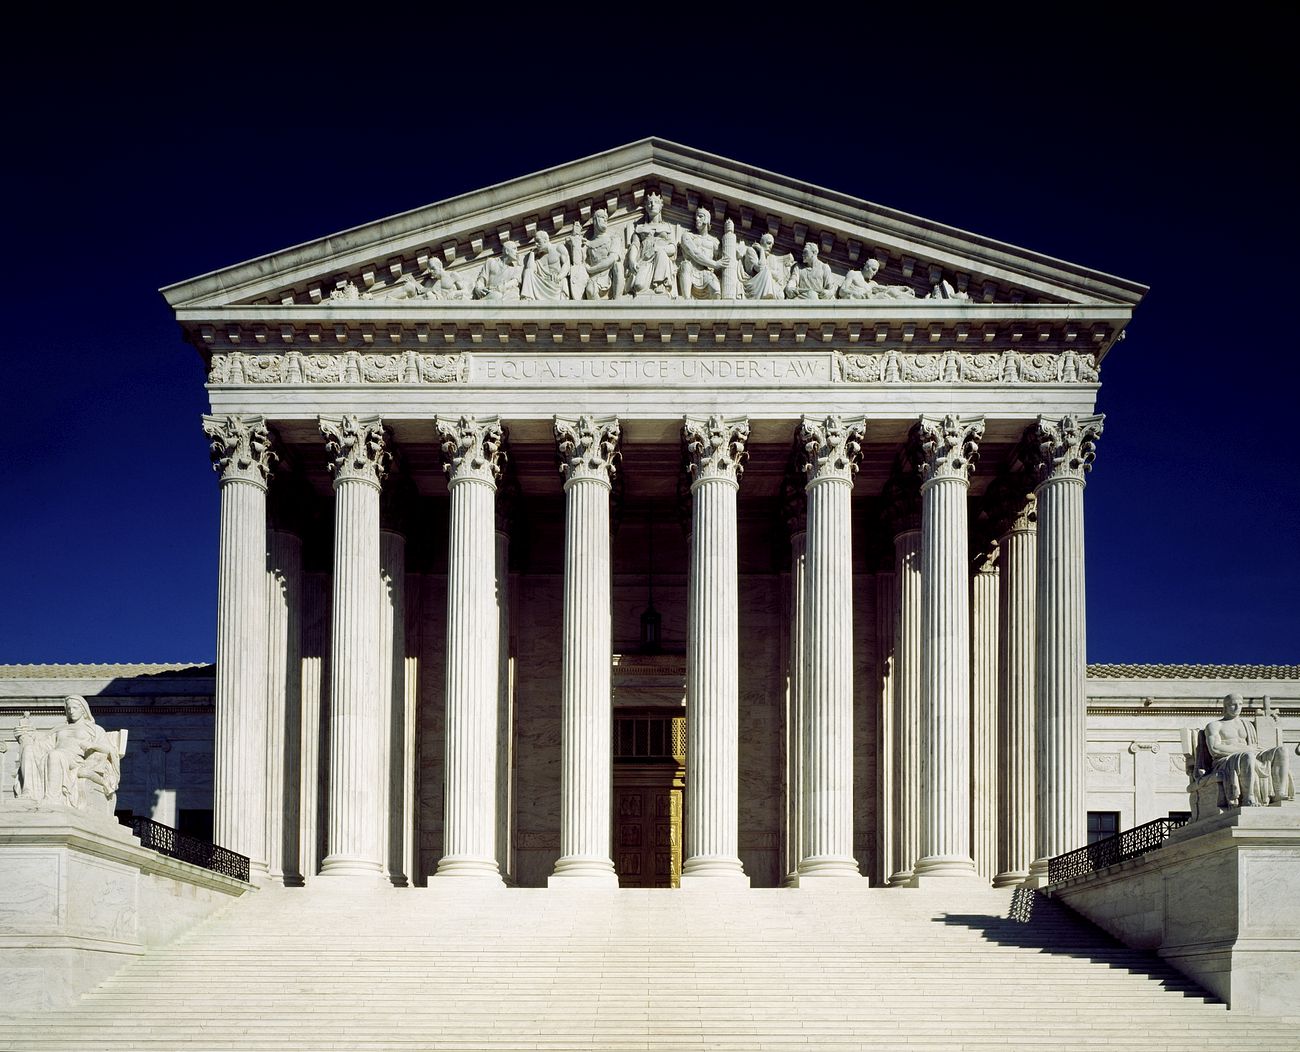 The Supreme Court Building on 1 by Carol M Highsmith is licensed under CC-CC0 1.0